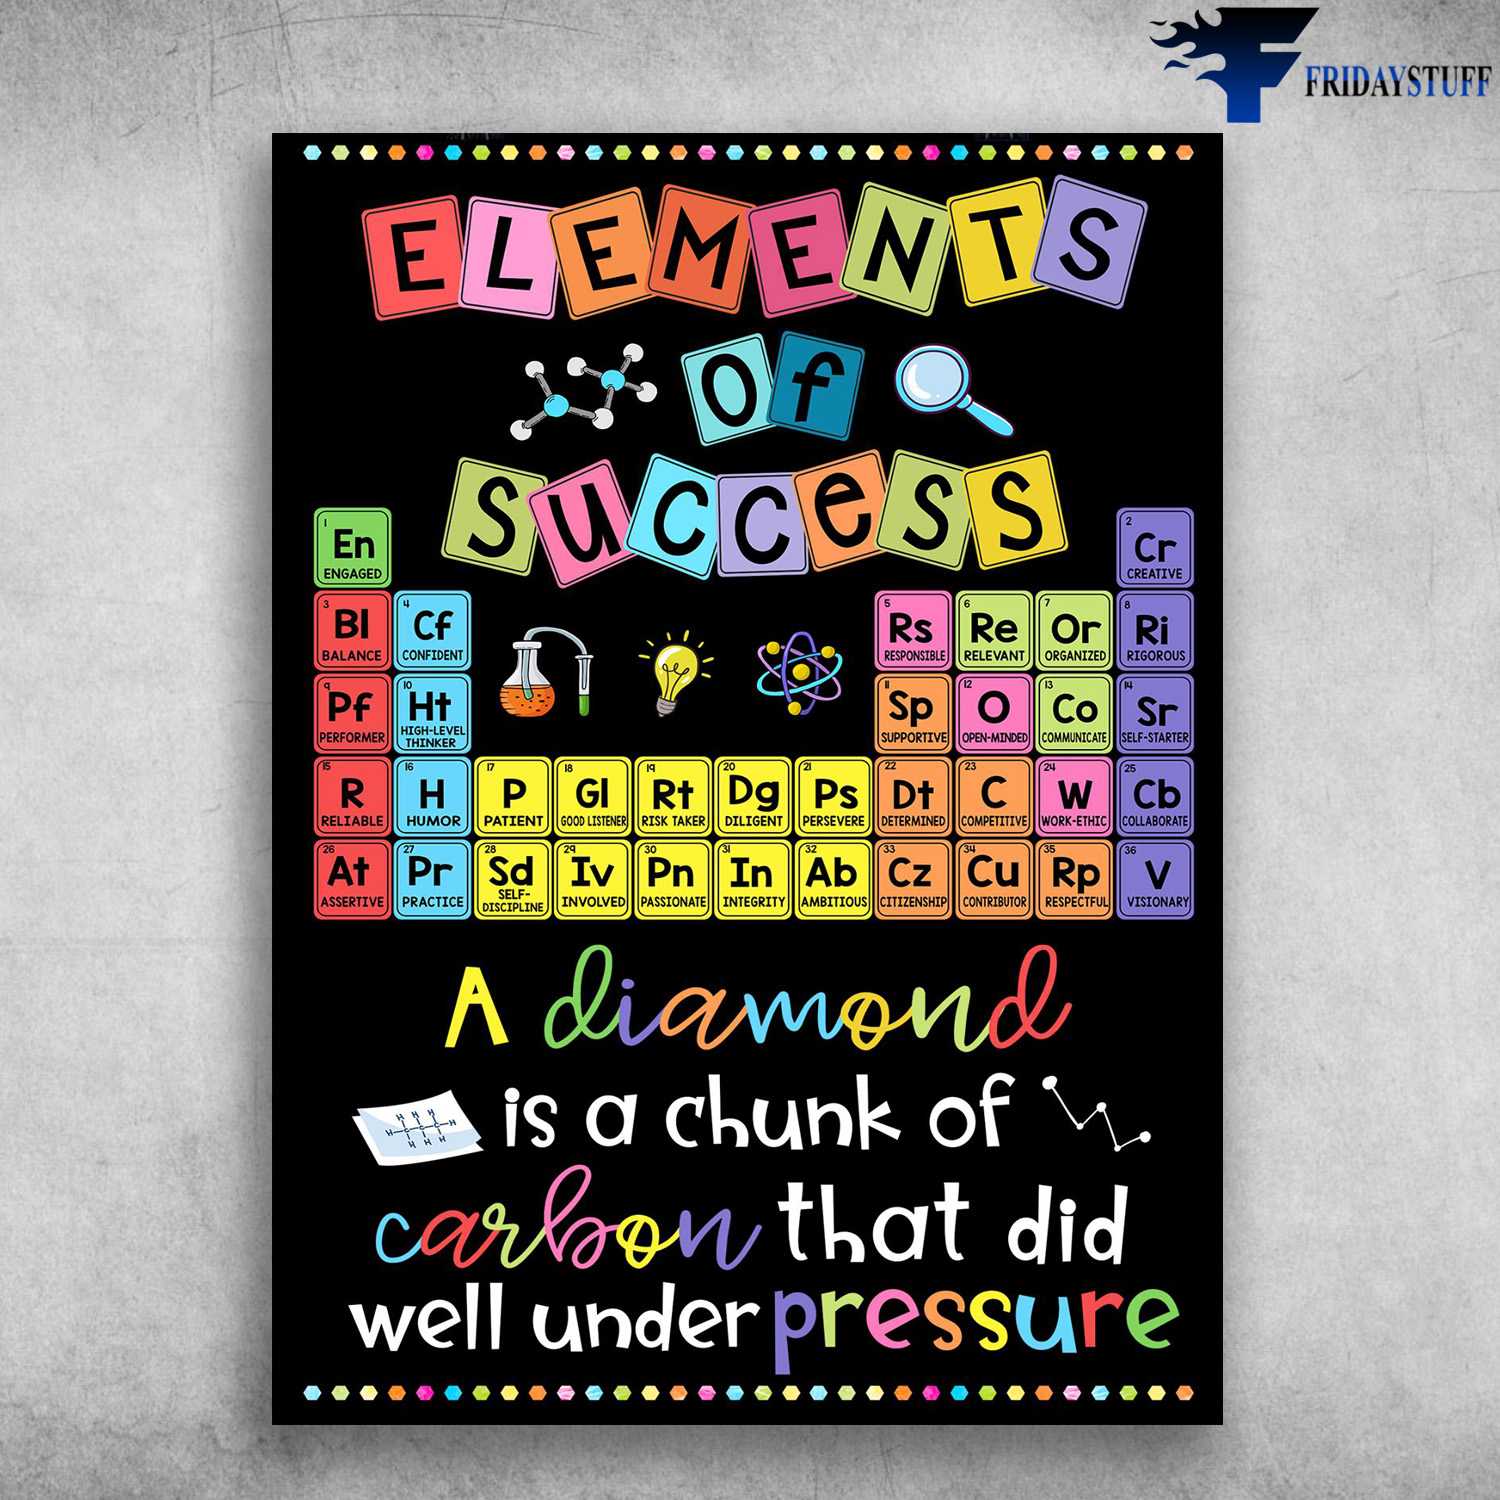 Elements Of Success, Adiamond Os A Chunk Of Carbon, That Did Well Under Pressure